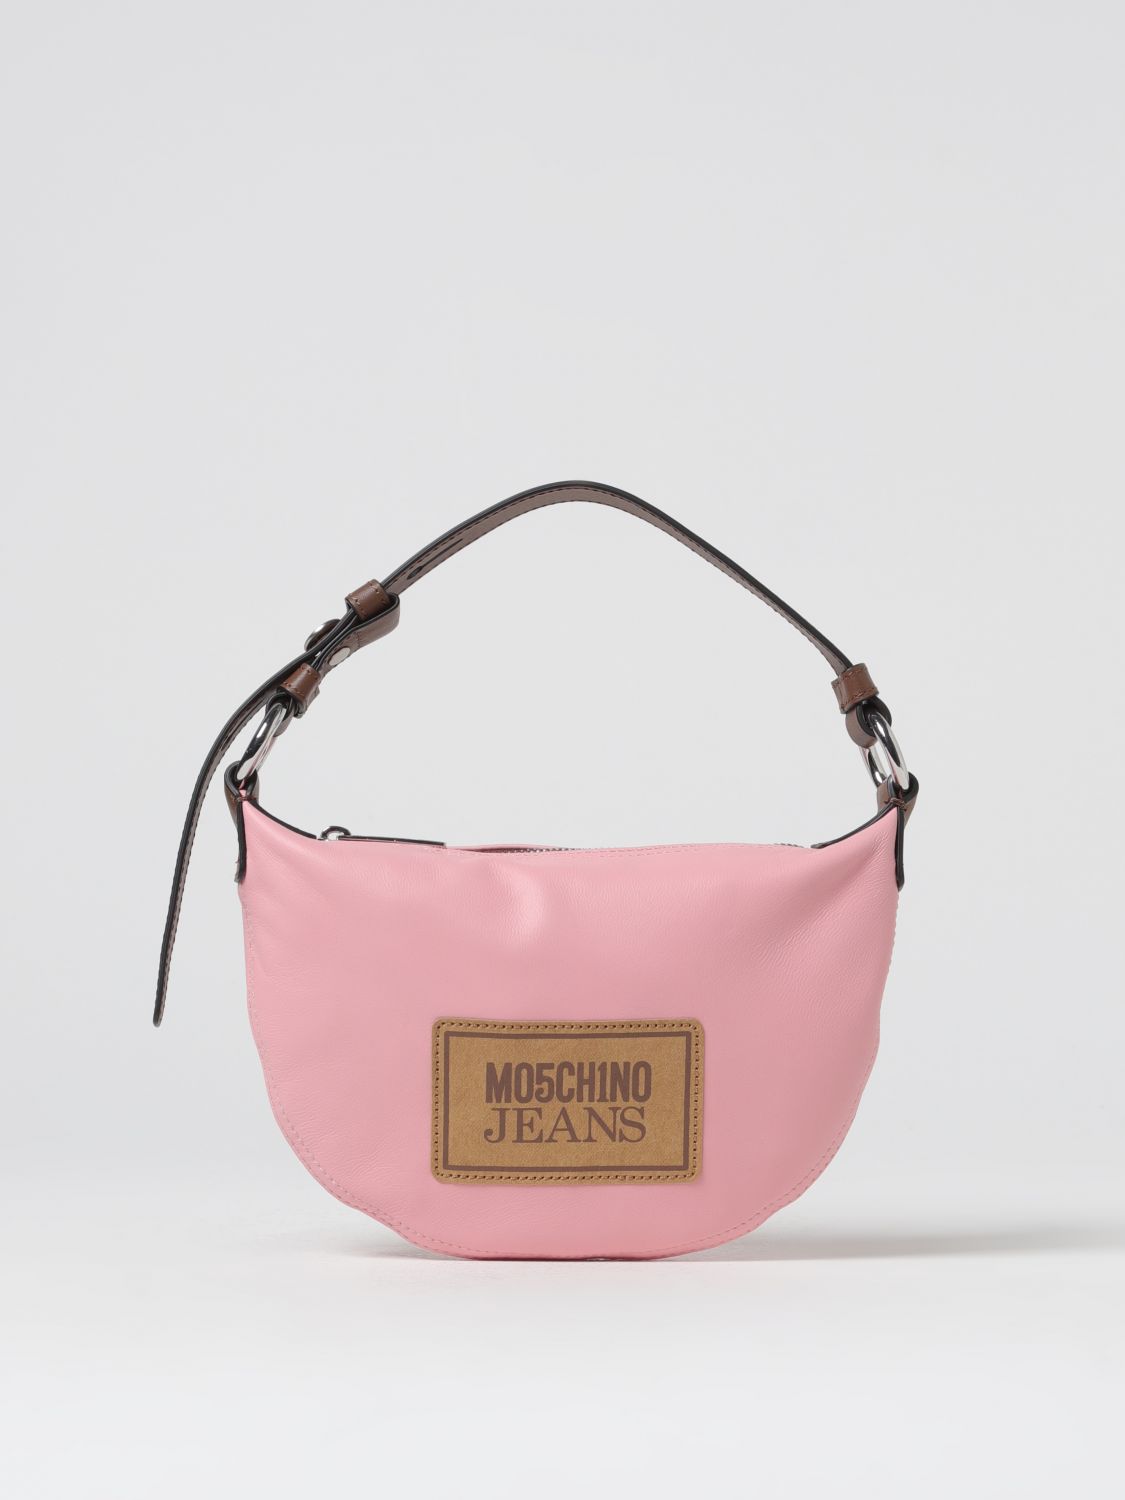 Moschino Jeans Mini Bag MOSCHINO JEANS Woman colour Pink